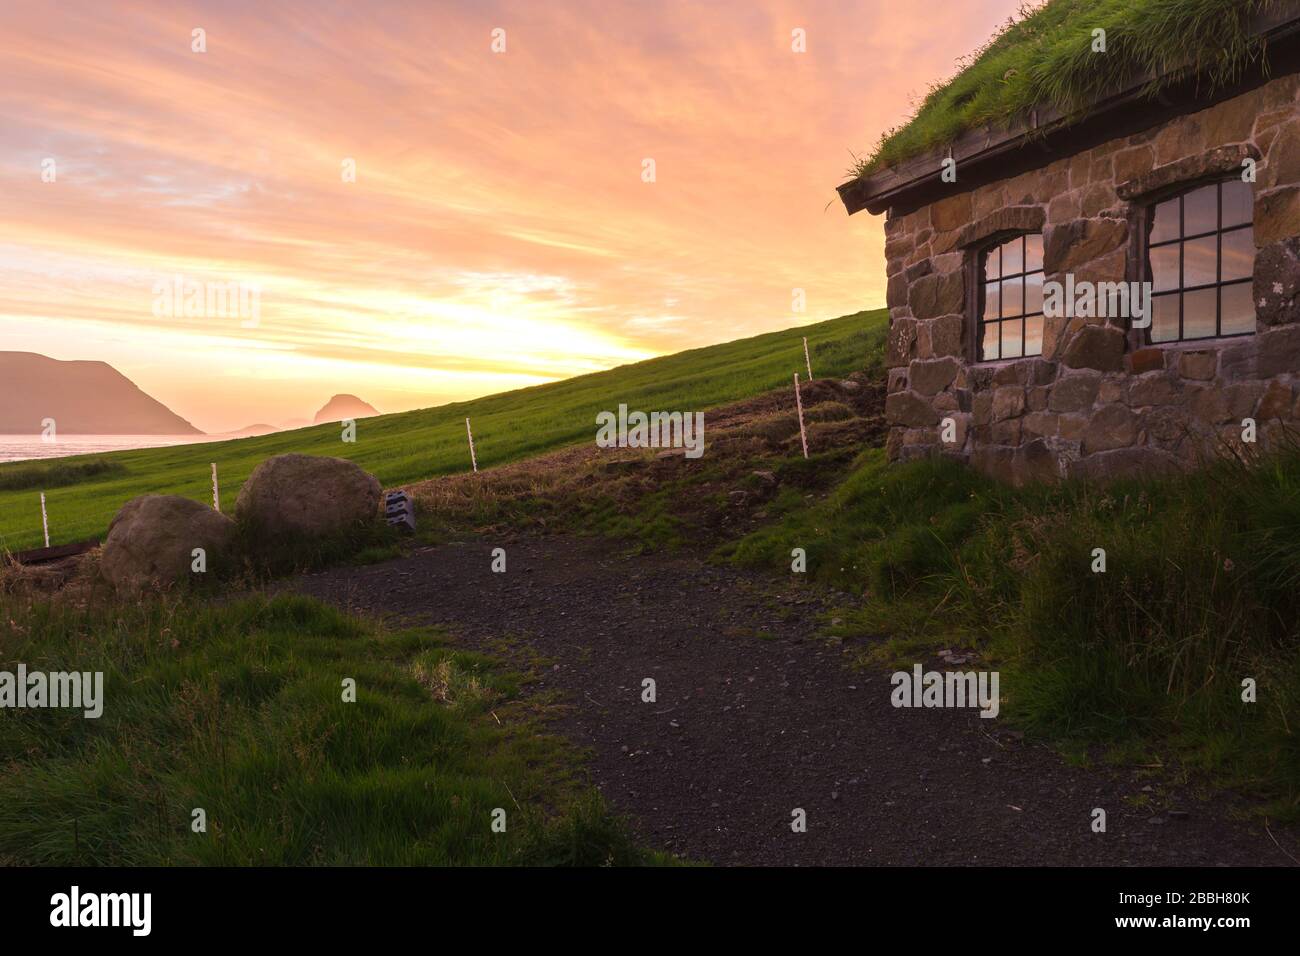 Kirkjubour house and Hestur in the distance, Streymoy, Faroe Islands Stock Photo